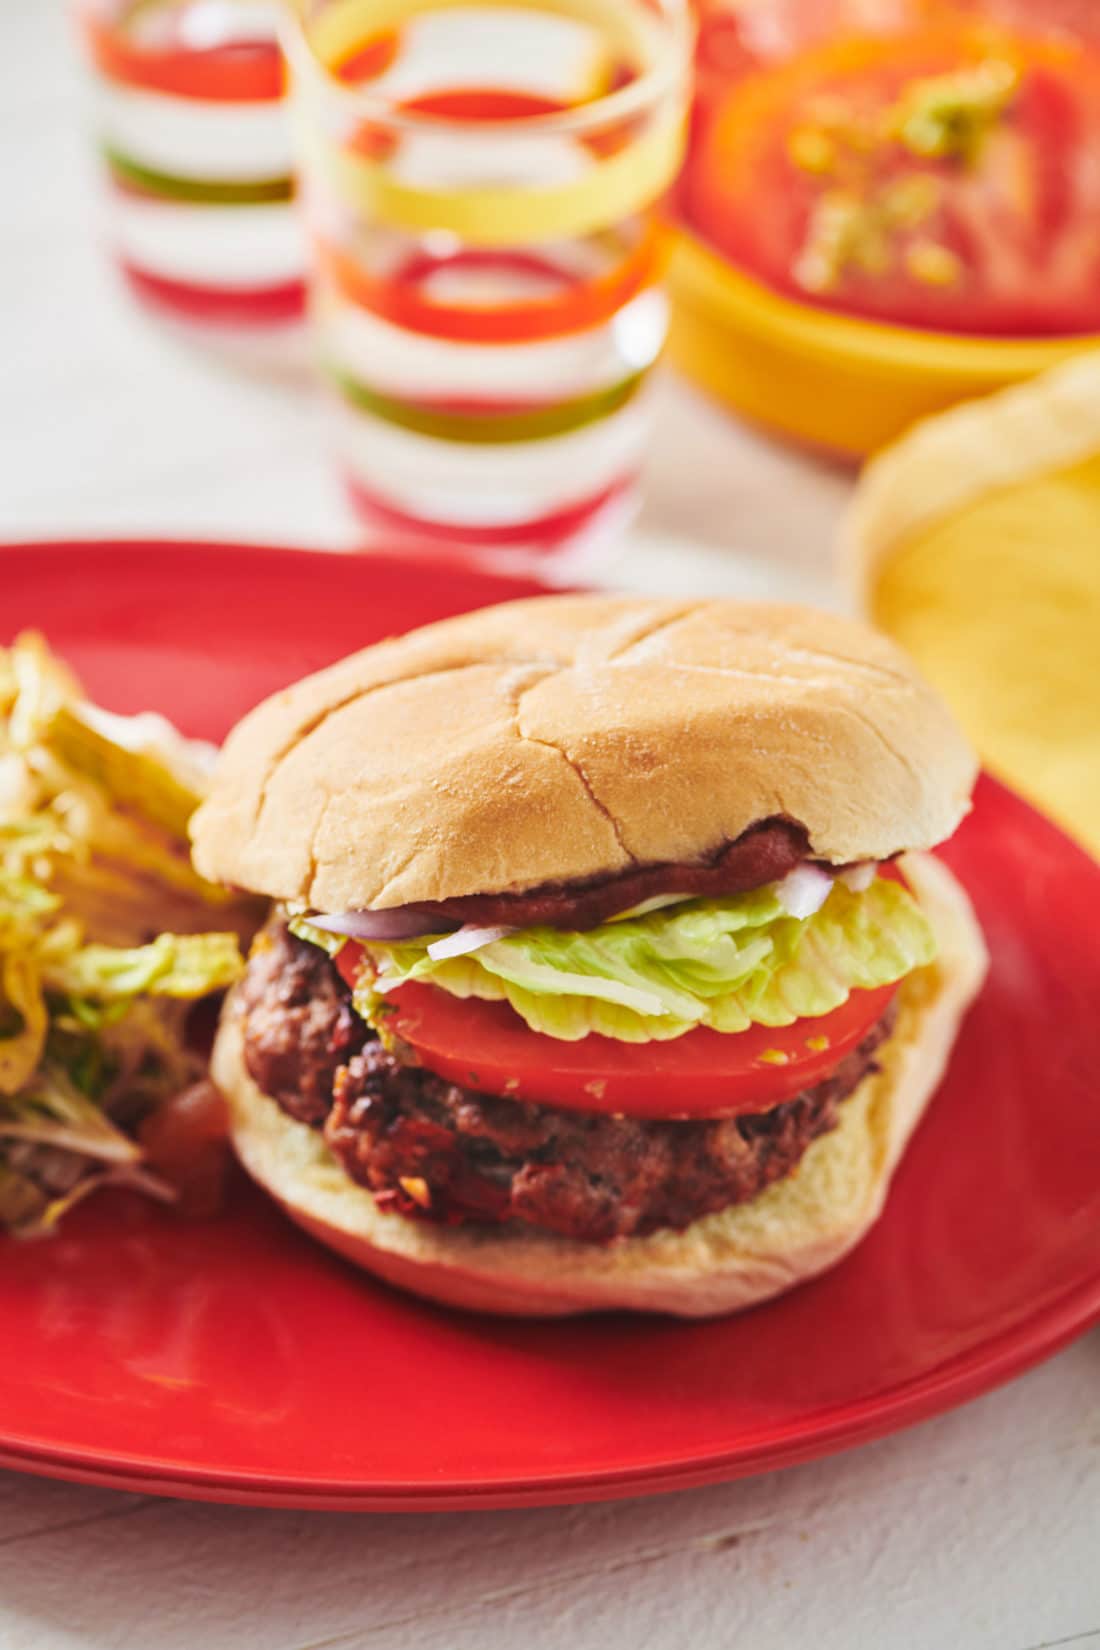 Chipotle Beef Burger on a red plate.